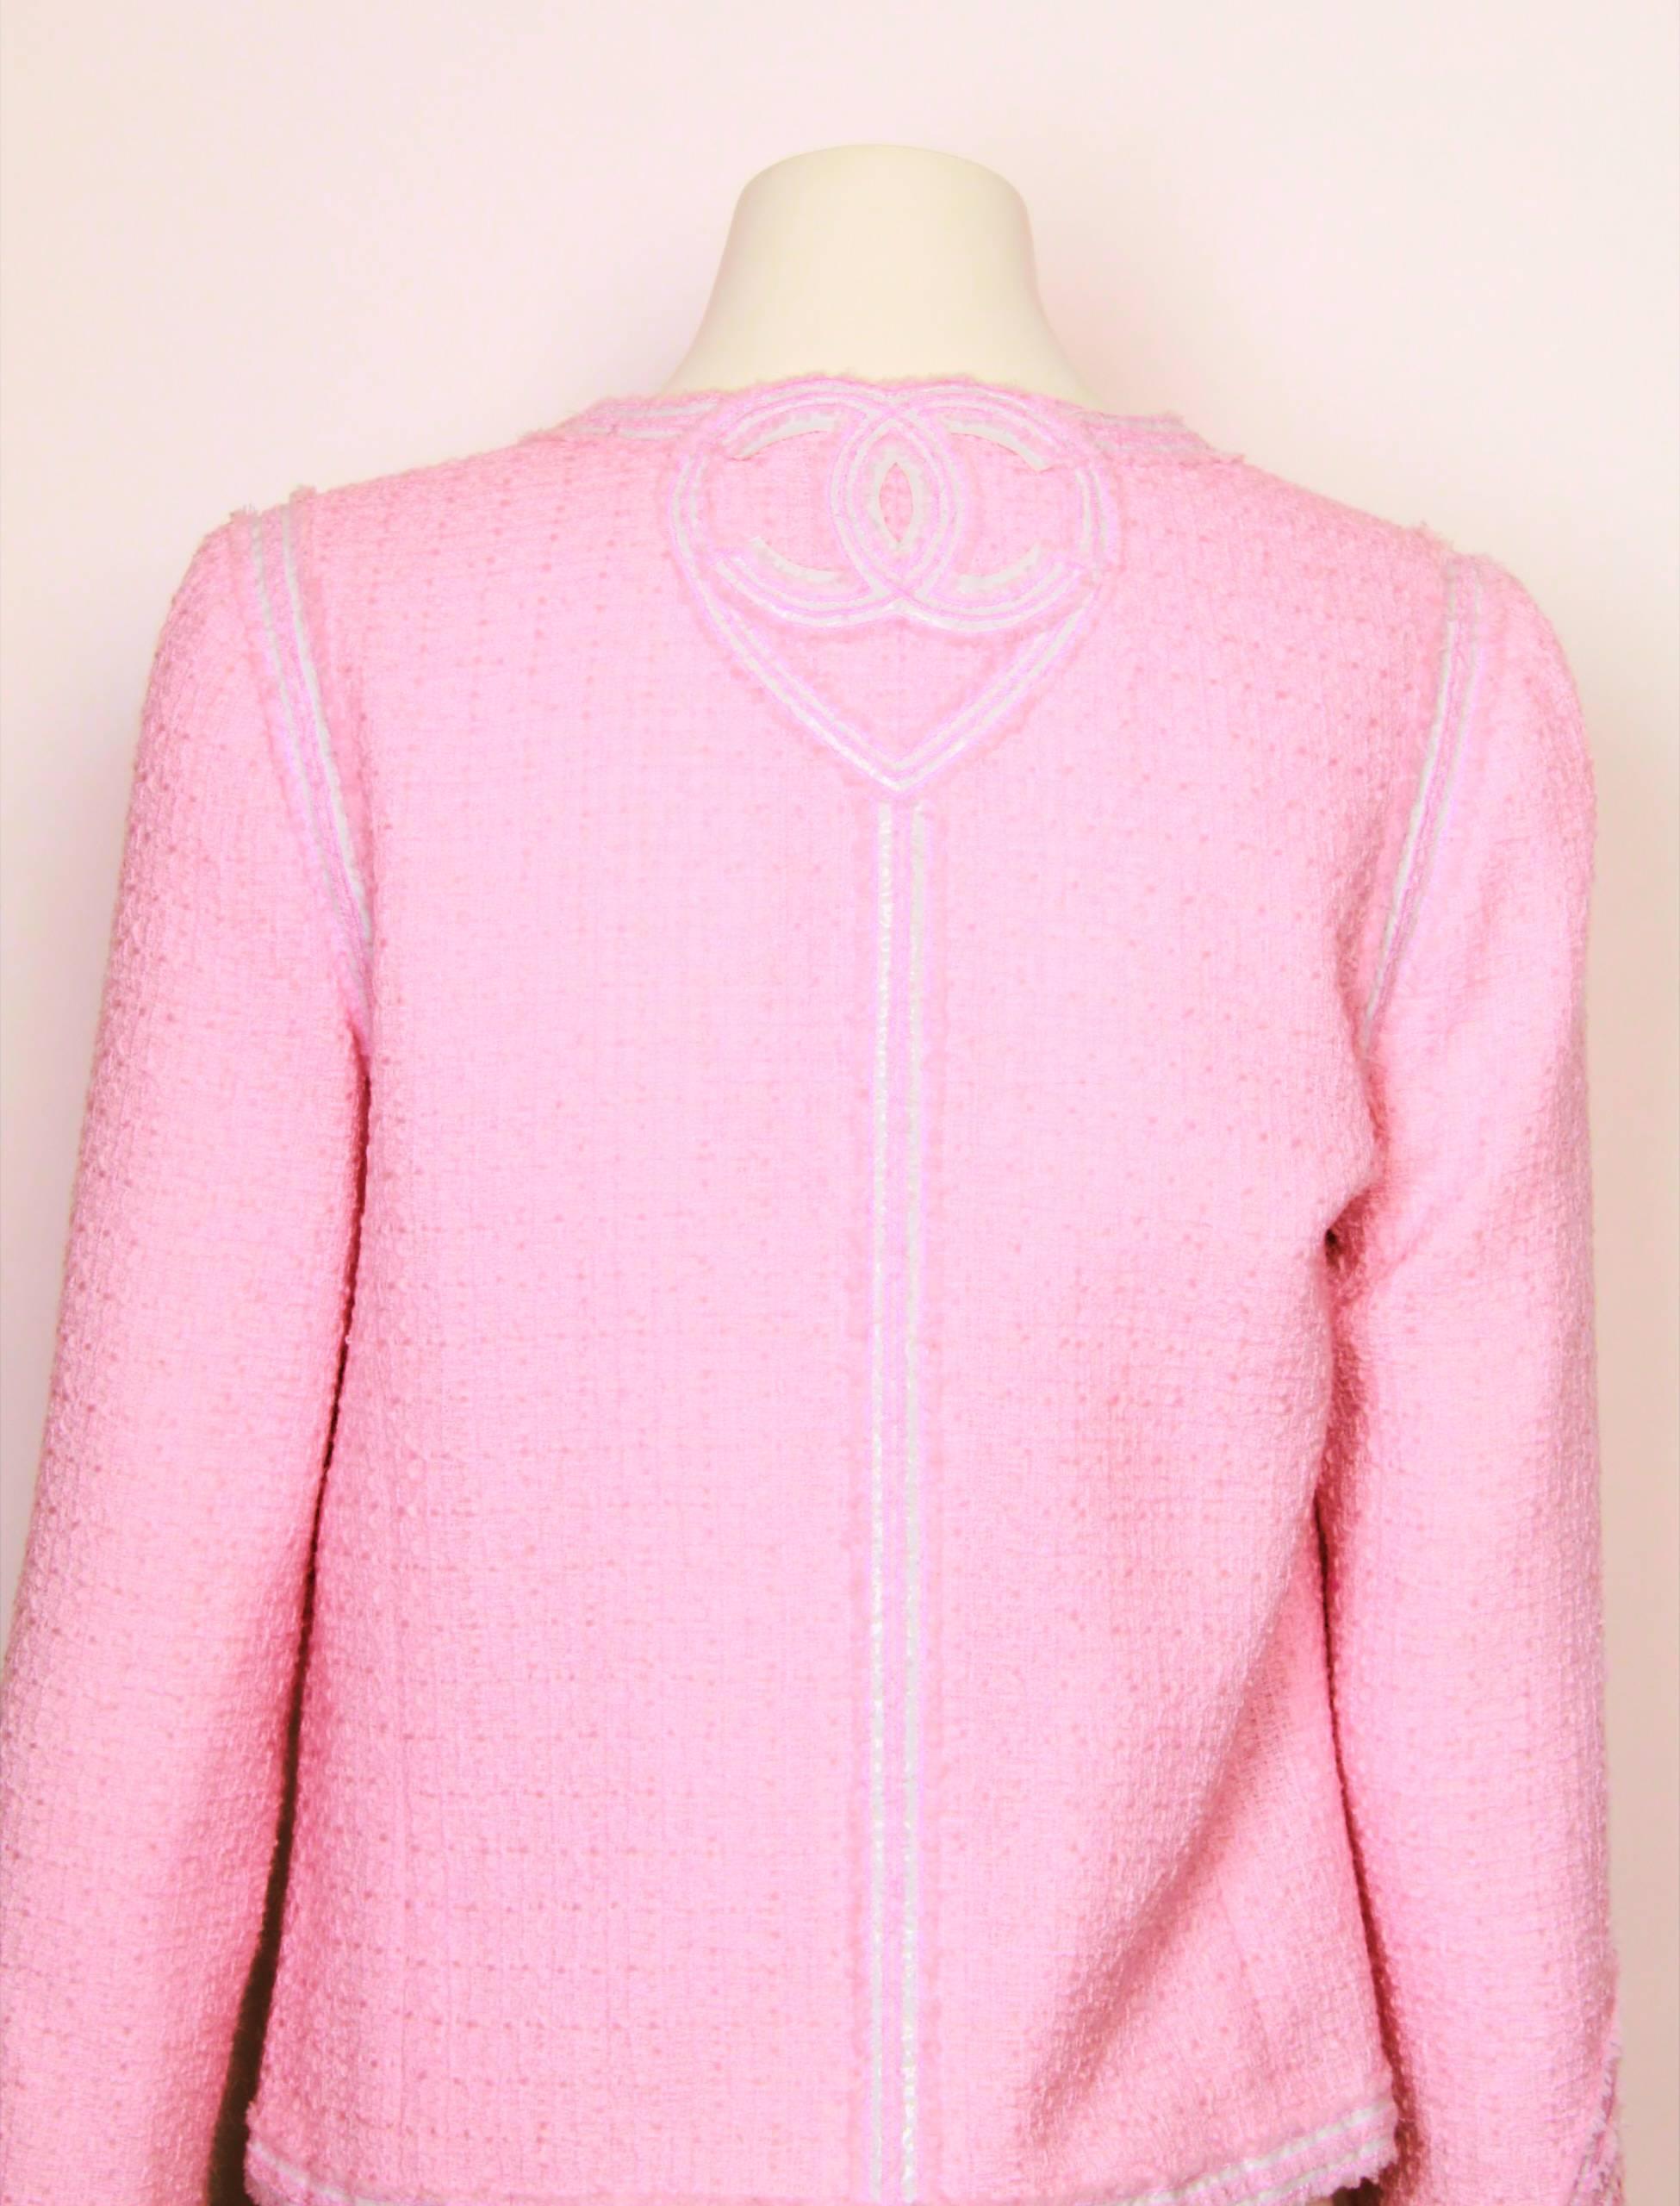 CHANEL Tweed Jacket in soft pink with white vinyl Chanel logo and heart  decorative feature on back neck and sleeve hem.
Entire jacket is edged in white vinyl strips. Jacket is fully lined in silk custom Chanel embossed lining with chain detailed